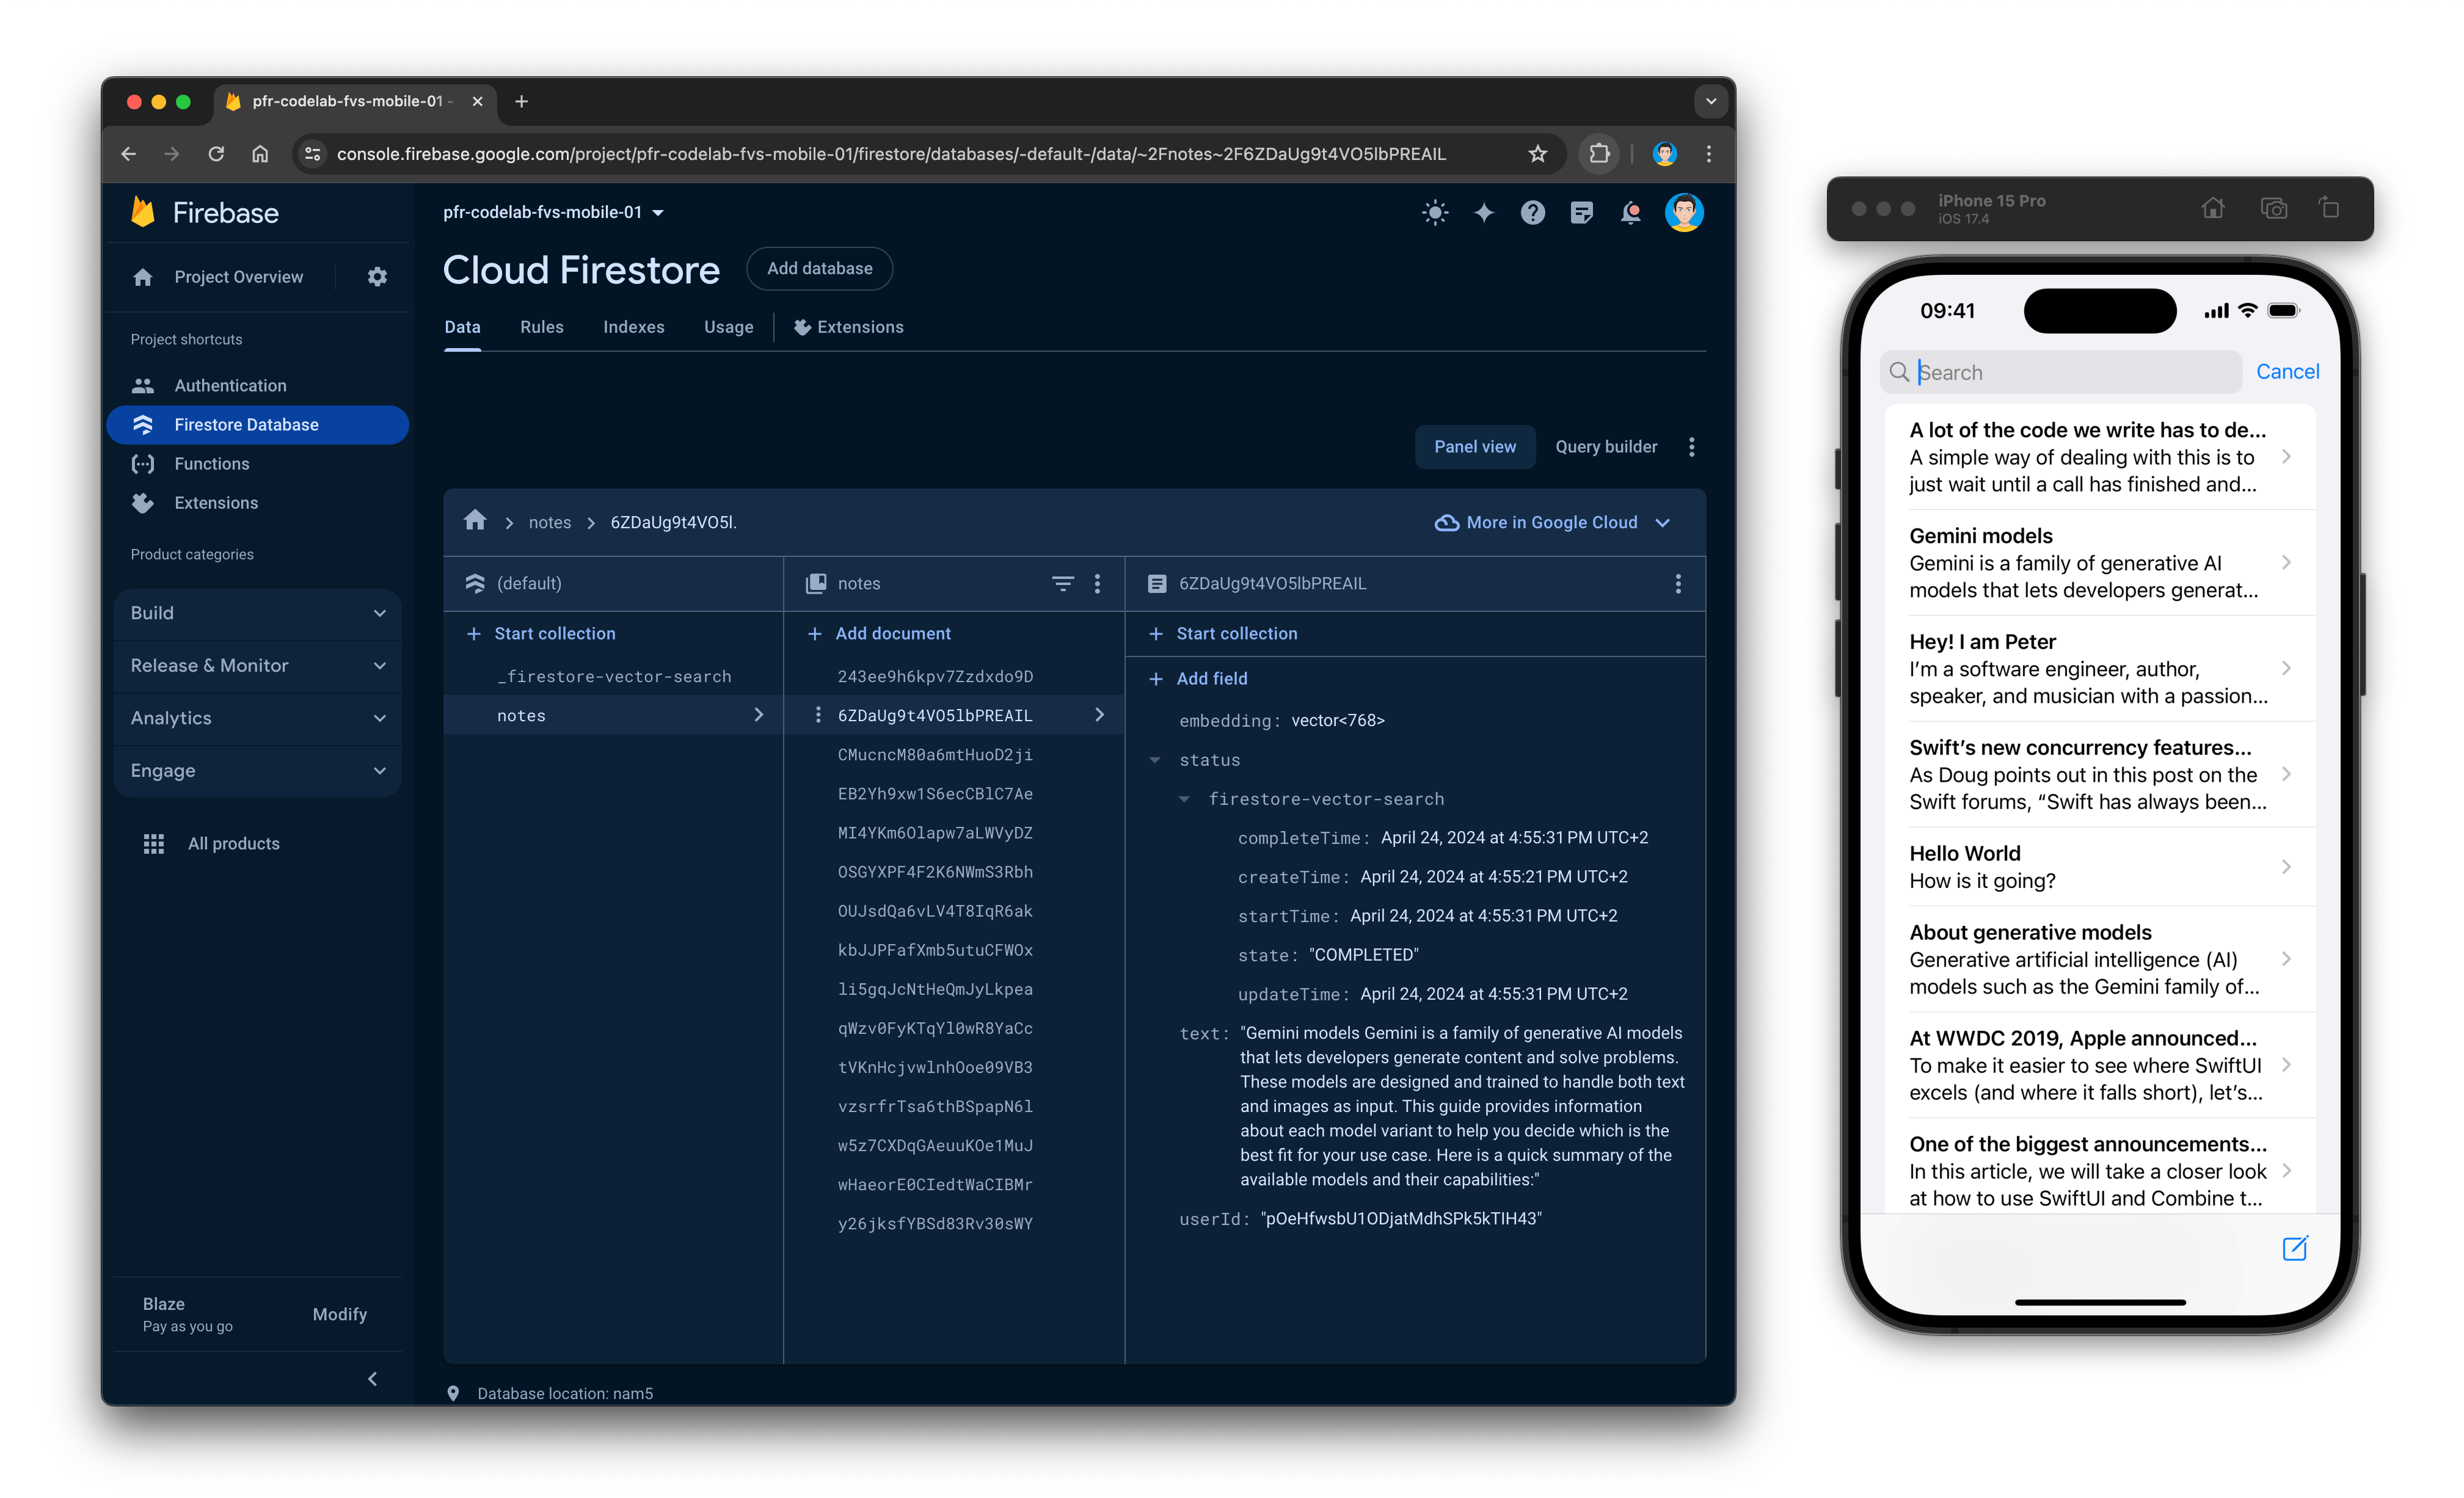 Cloud Firestore console showing some documents, which also are visible in the iOS app on the right hand side.